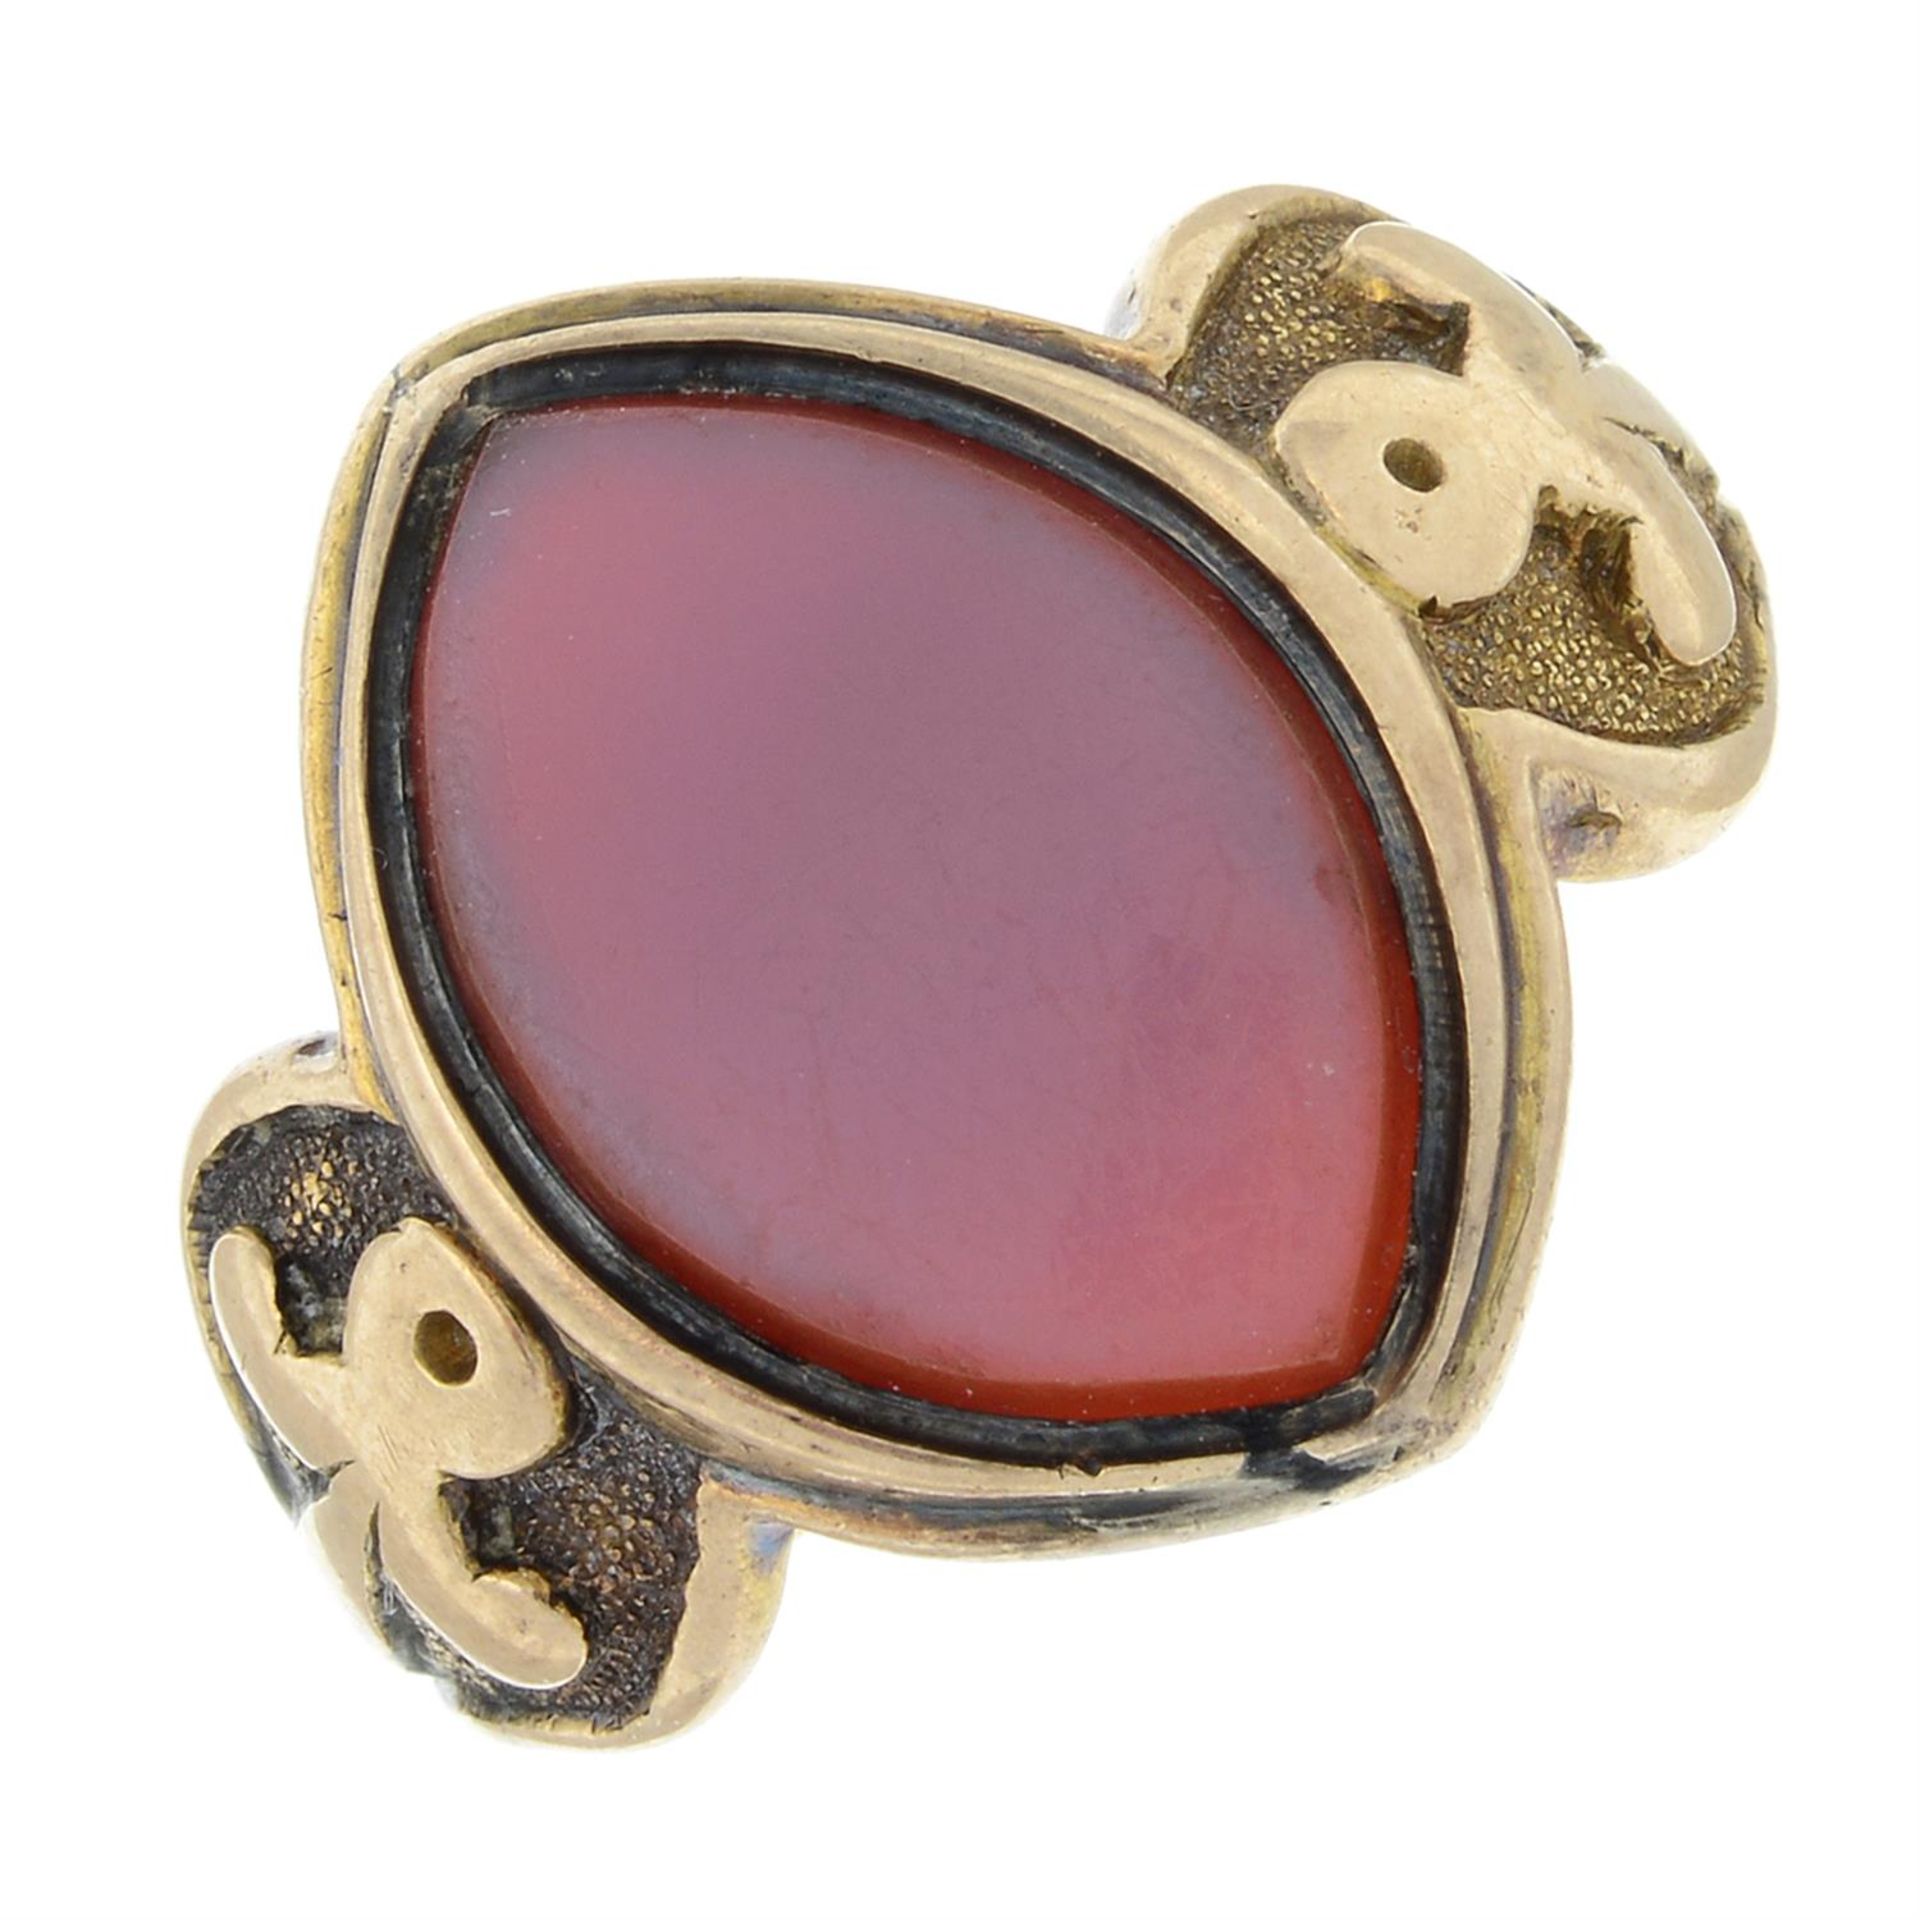 A late Victorian 15ct gold sardonyx signet ring, with ankh motif shoulders.